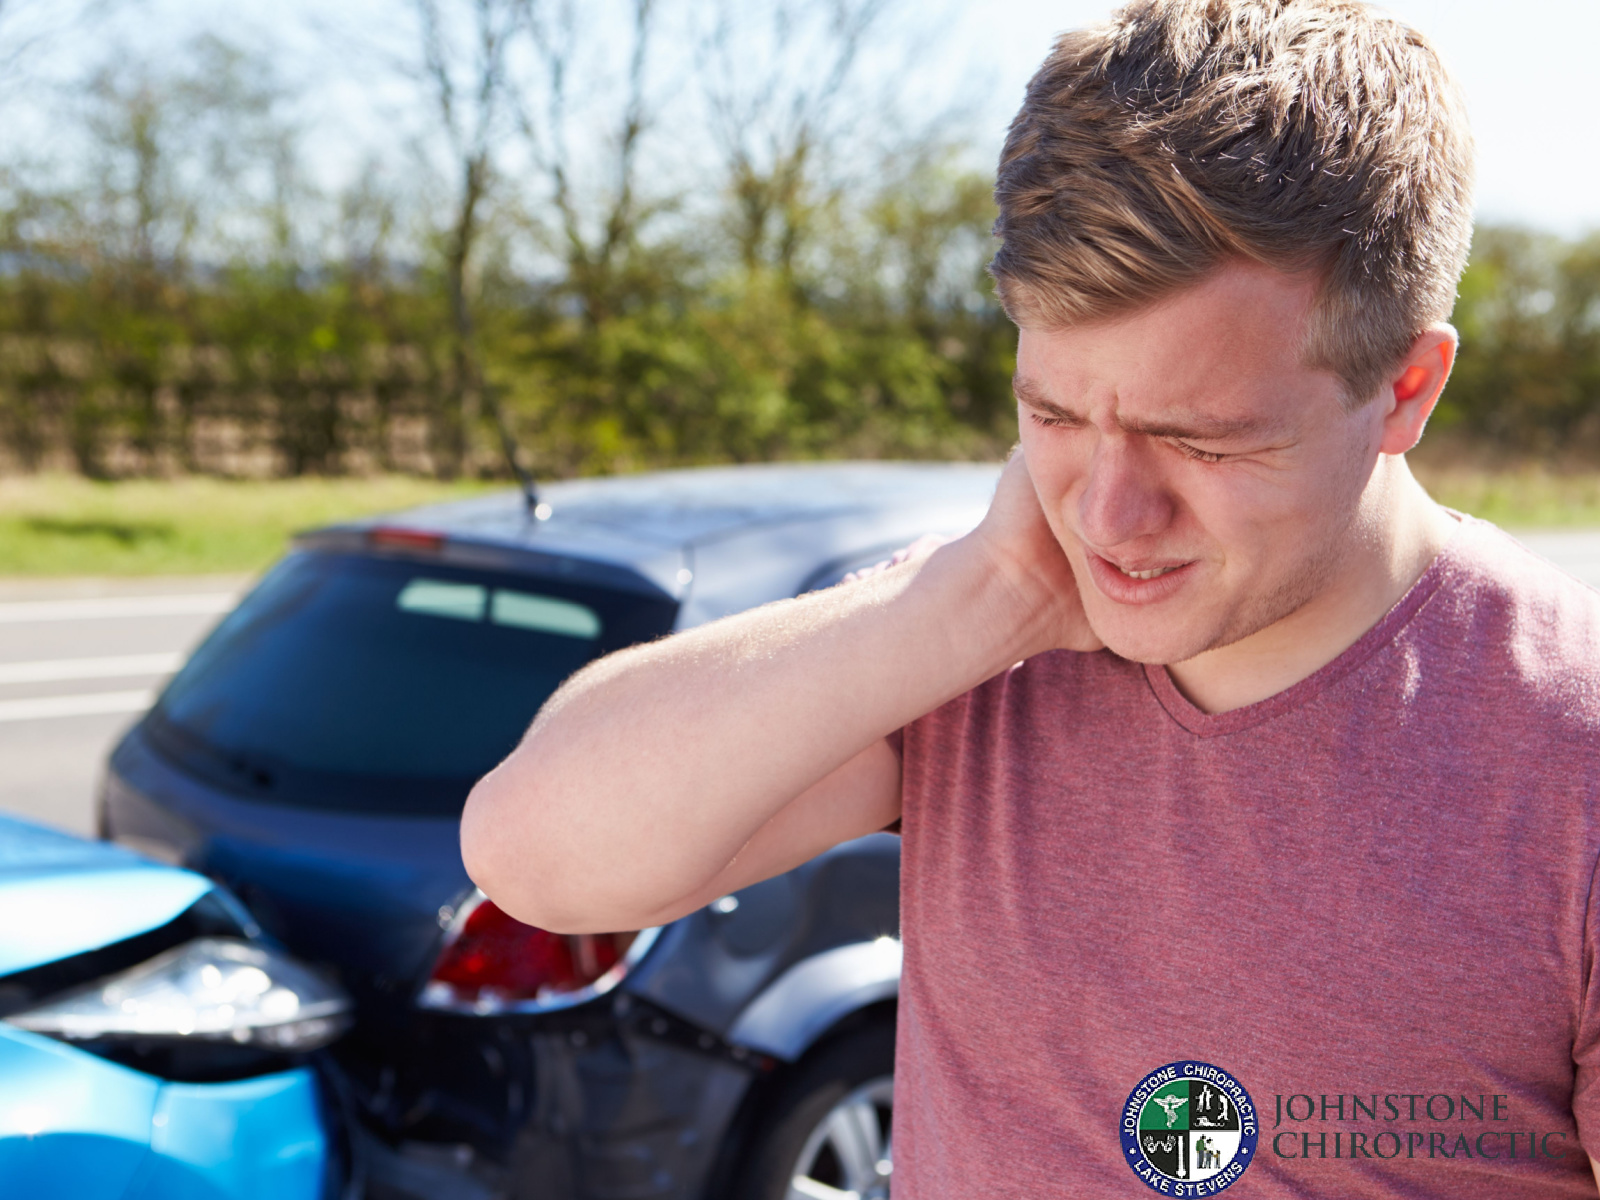 Involved in an Auto Accident? Let Johnstone Chiropractic Help Regain Your Comfort!